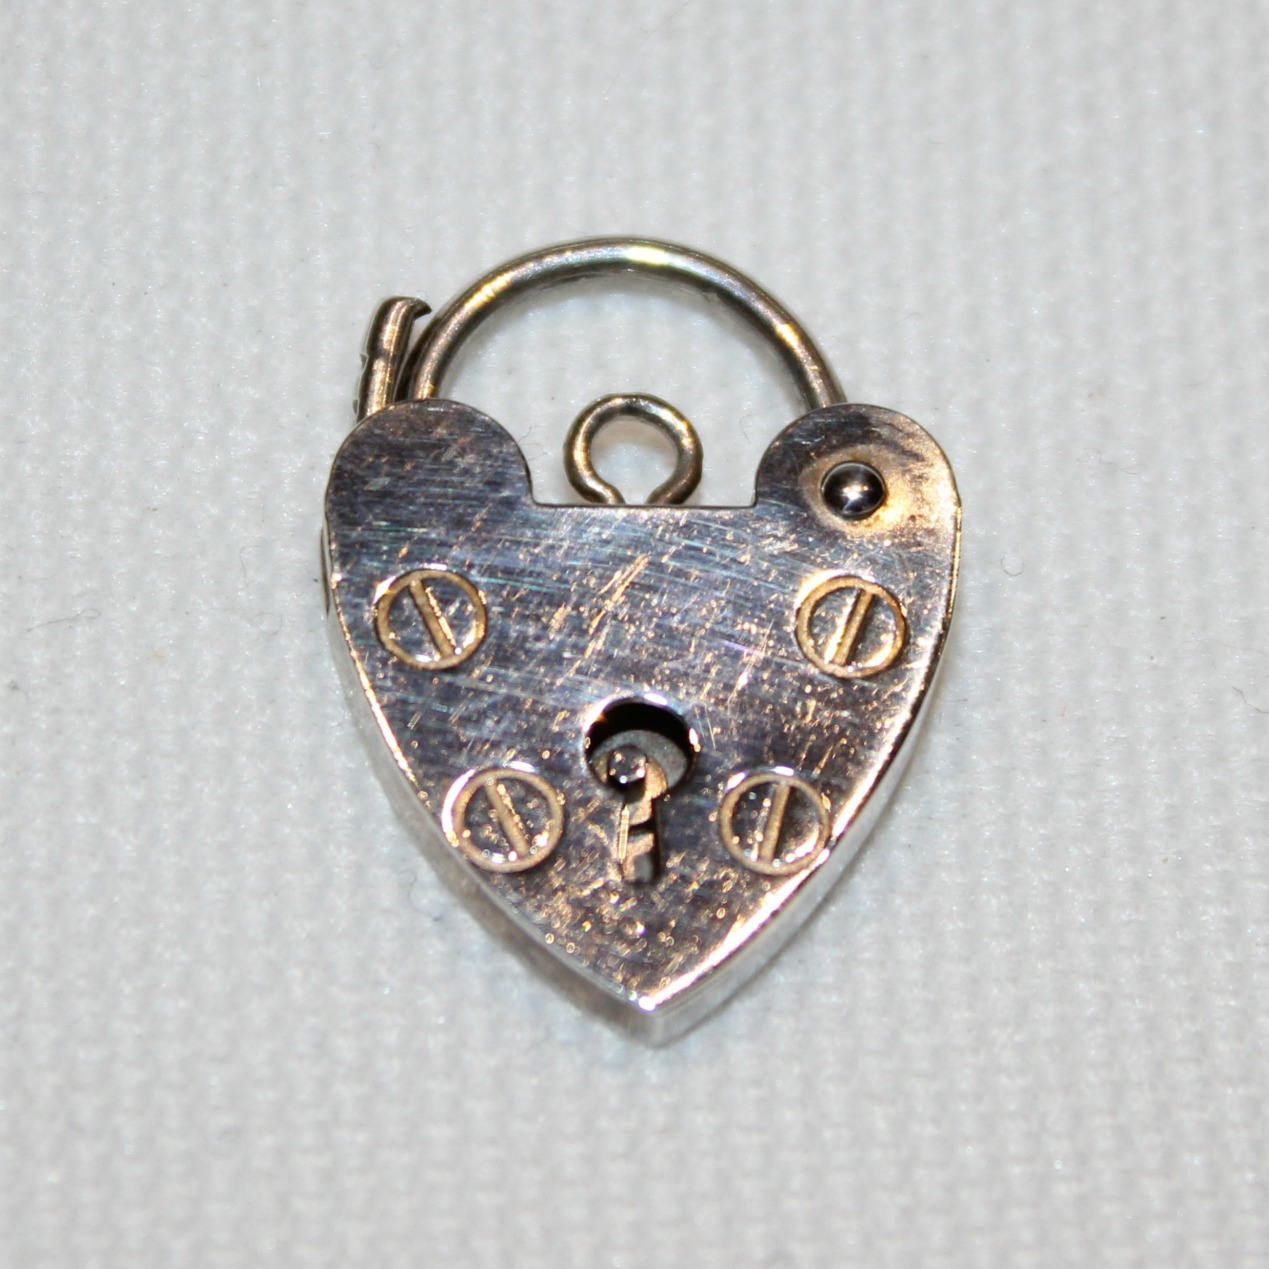 Sterling Silver Heart Padlock (suitable For A Bracelet) London 1990 Pertaining To Most Recent Heart Shaped Padlock Rings (View 11 of 25)